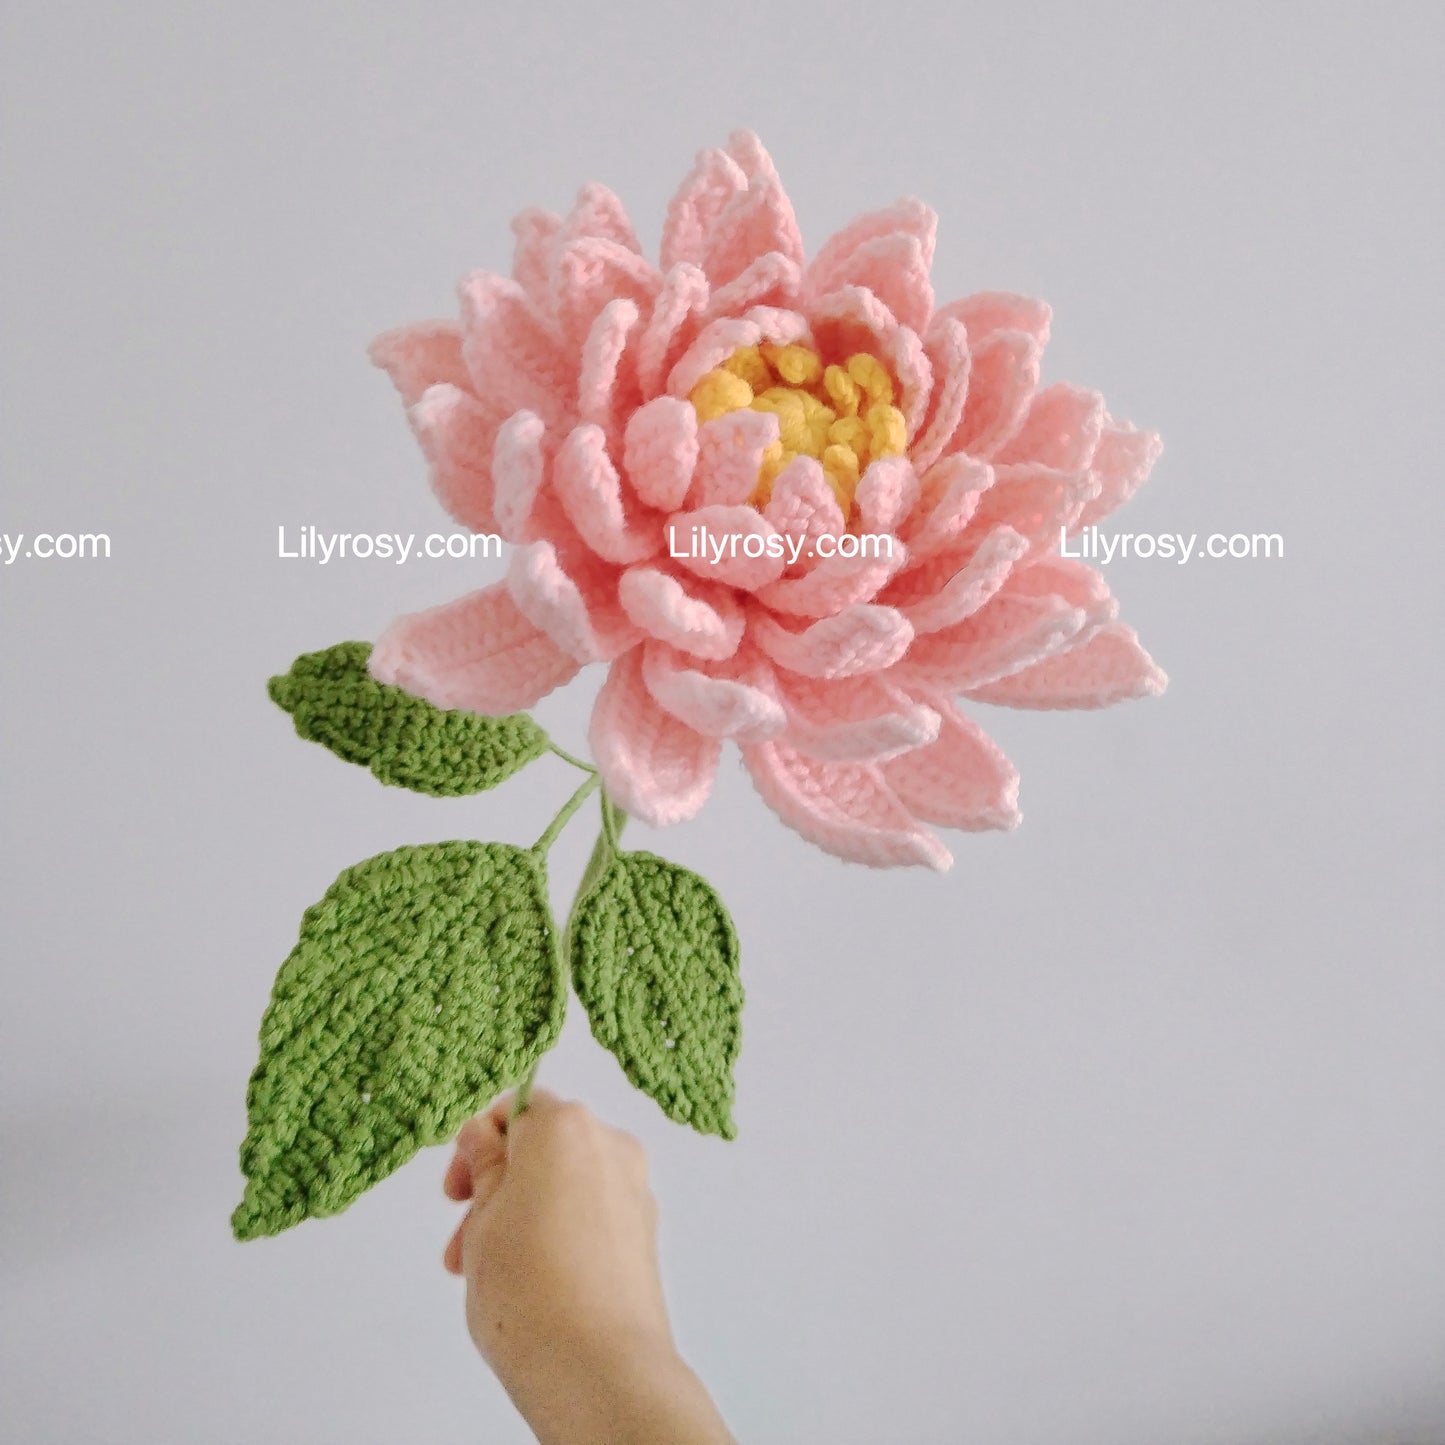 Lilyrosy Crochet Dahlia Flowers Patterns with Step by Step Video Tutorial